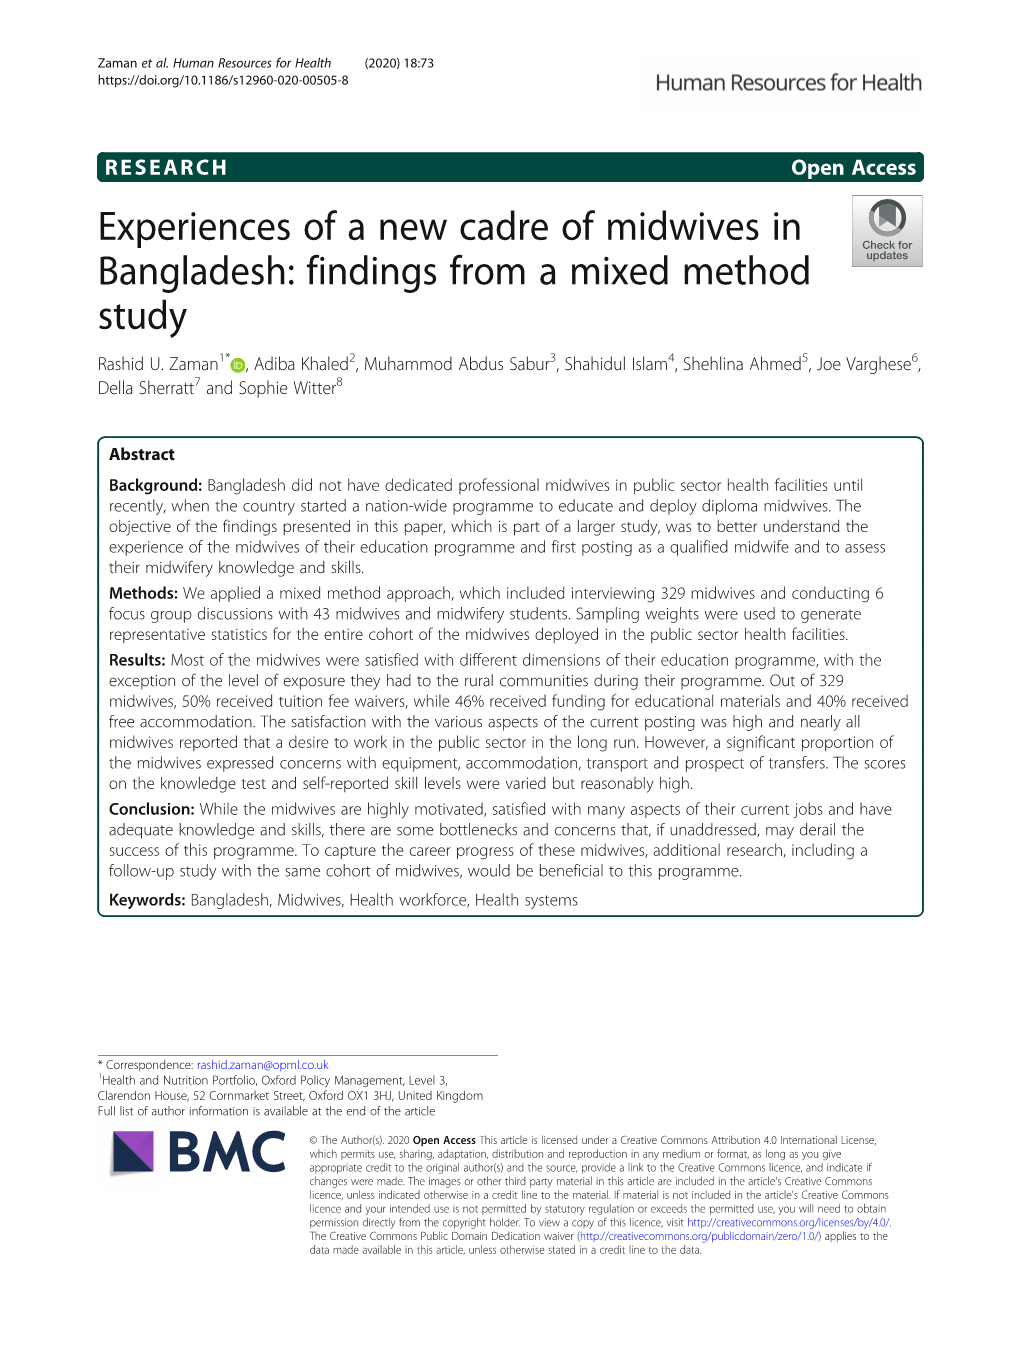 Experiences of a New Cadre of Midwives in Bangladesh: Findings from a Mixed Method Study Rashid U